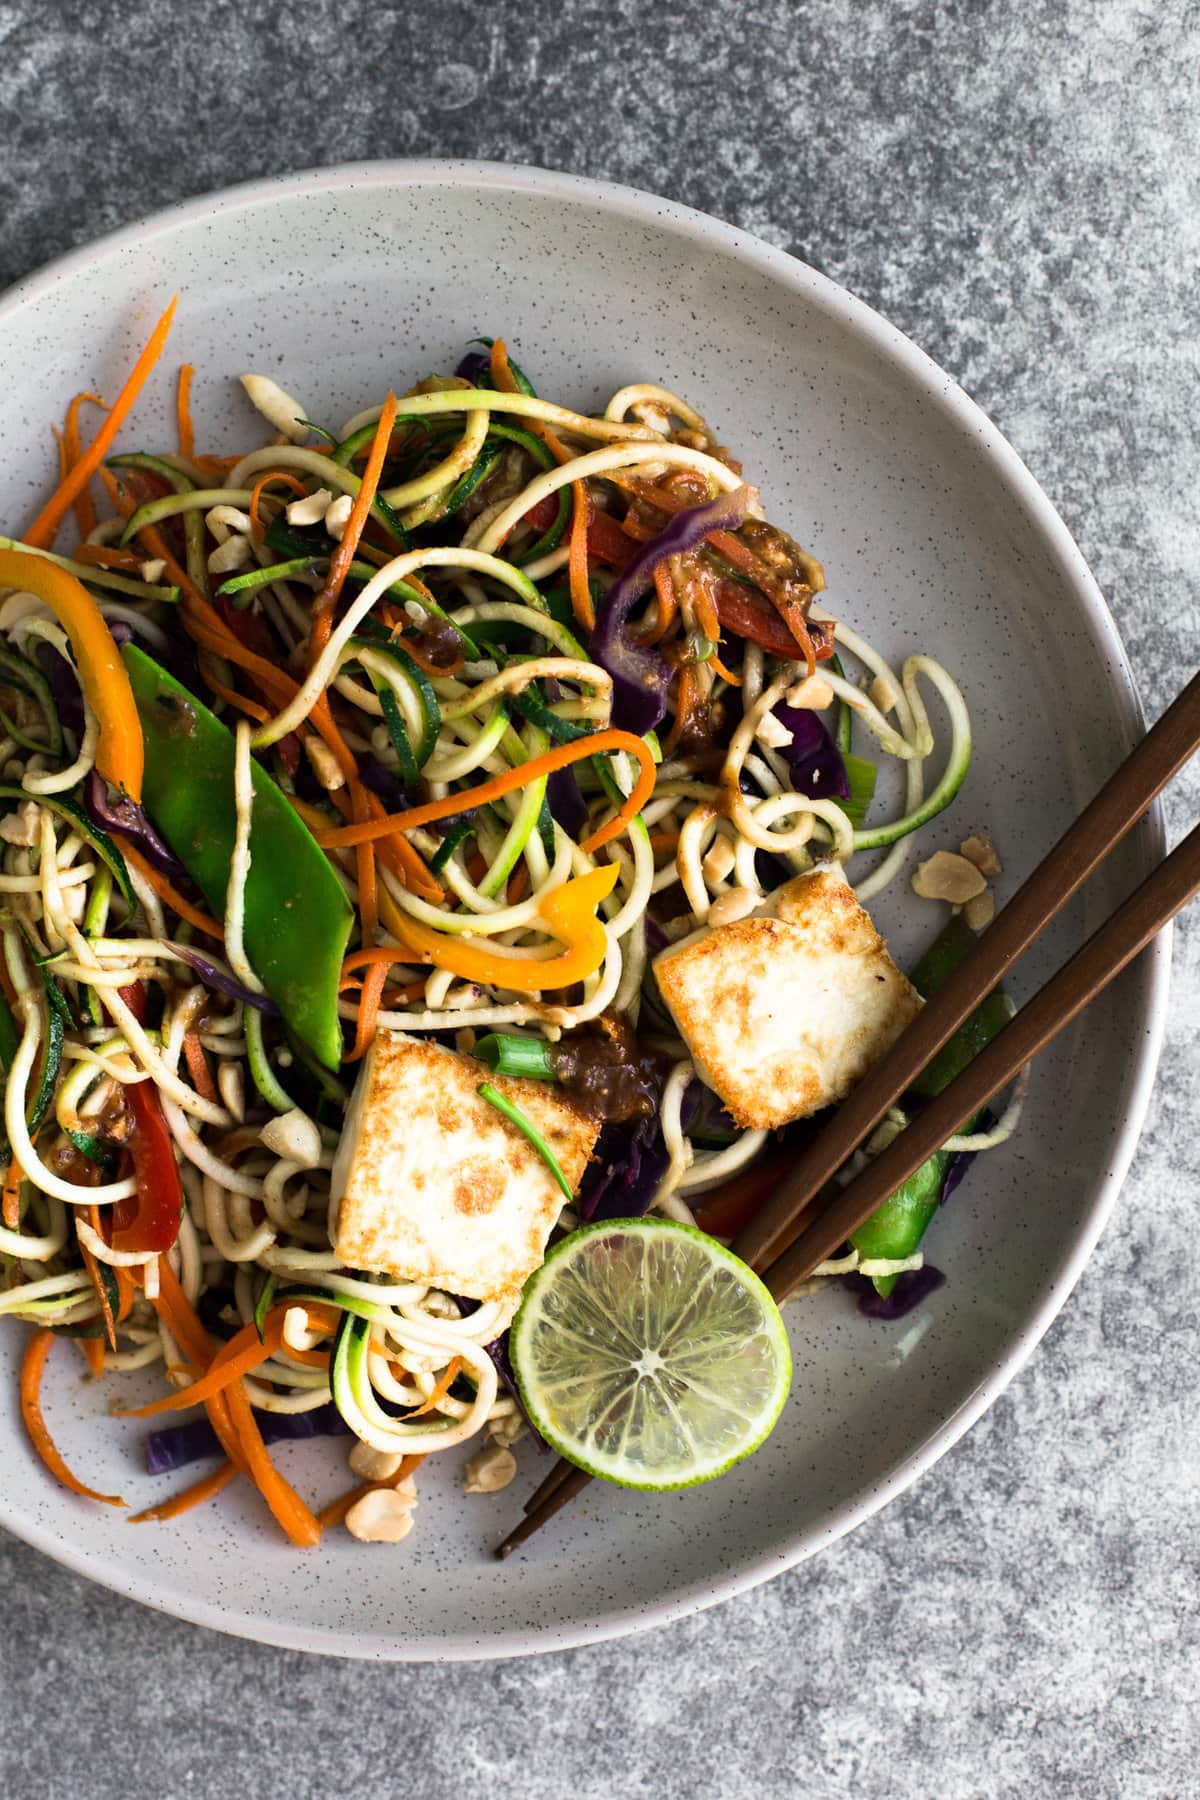 Delicious, healthy and light Asian Rainbow Zucchini Noodles with Crispy Tofu and an Almond Butter Dressing. Vegan, Gluten Free, Ready in Under 25 minutes. #vegan #zucchini #zoodle #padthai #vegetarian #lowcarb #tofu #peppers #healthy #simple #asian #almondbutter #dressing #glutenfree